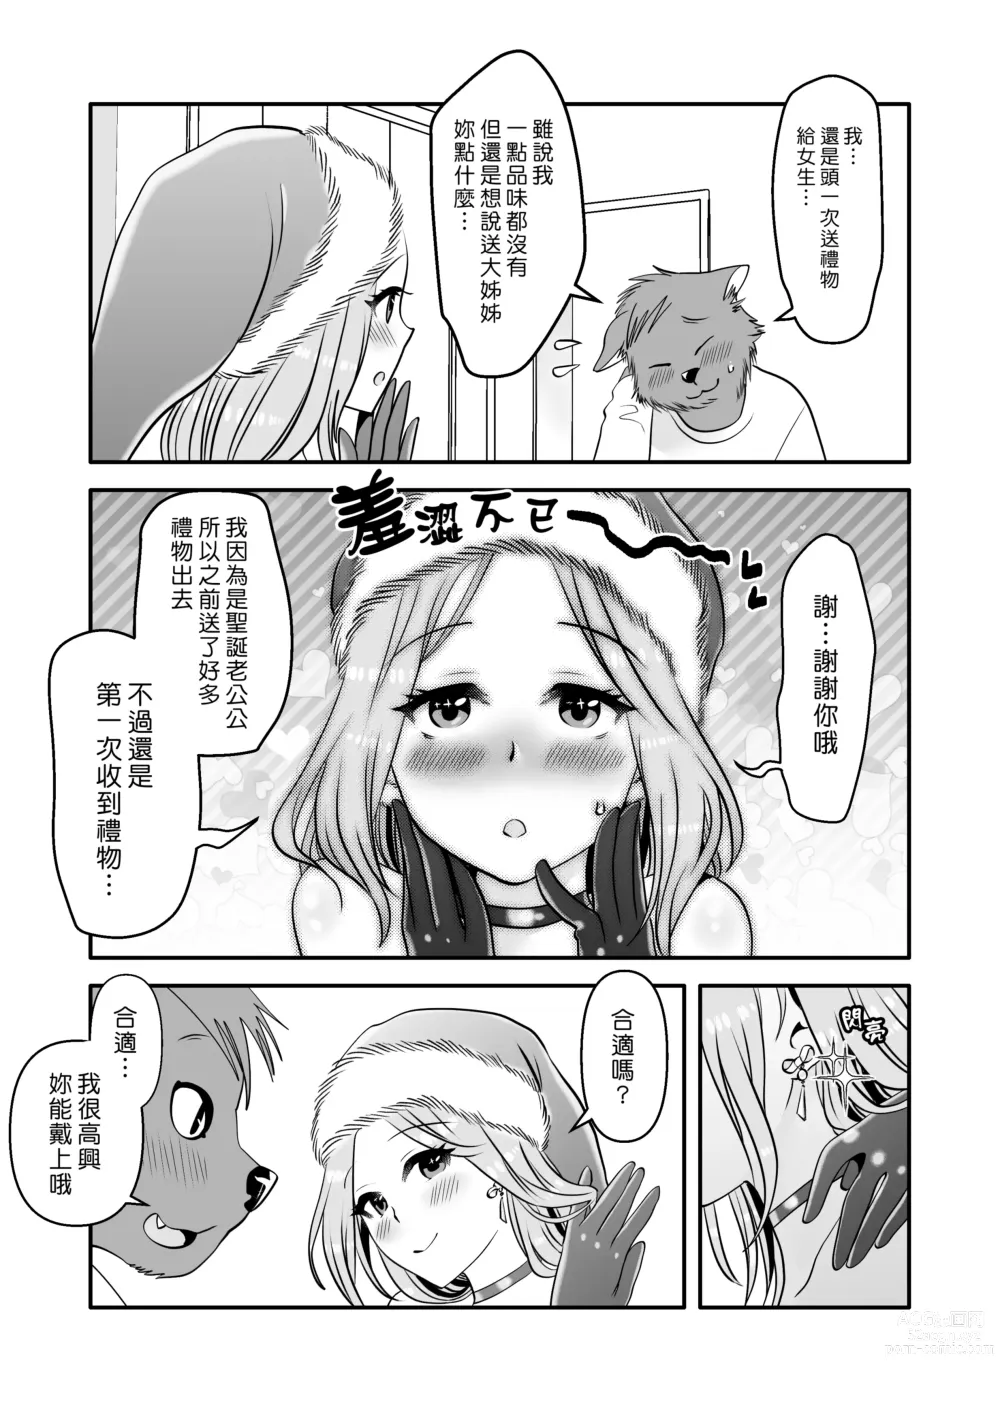 Page 23 of doujinshi 獸人君與聖誕大姊姊